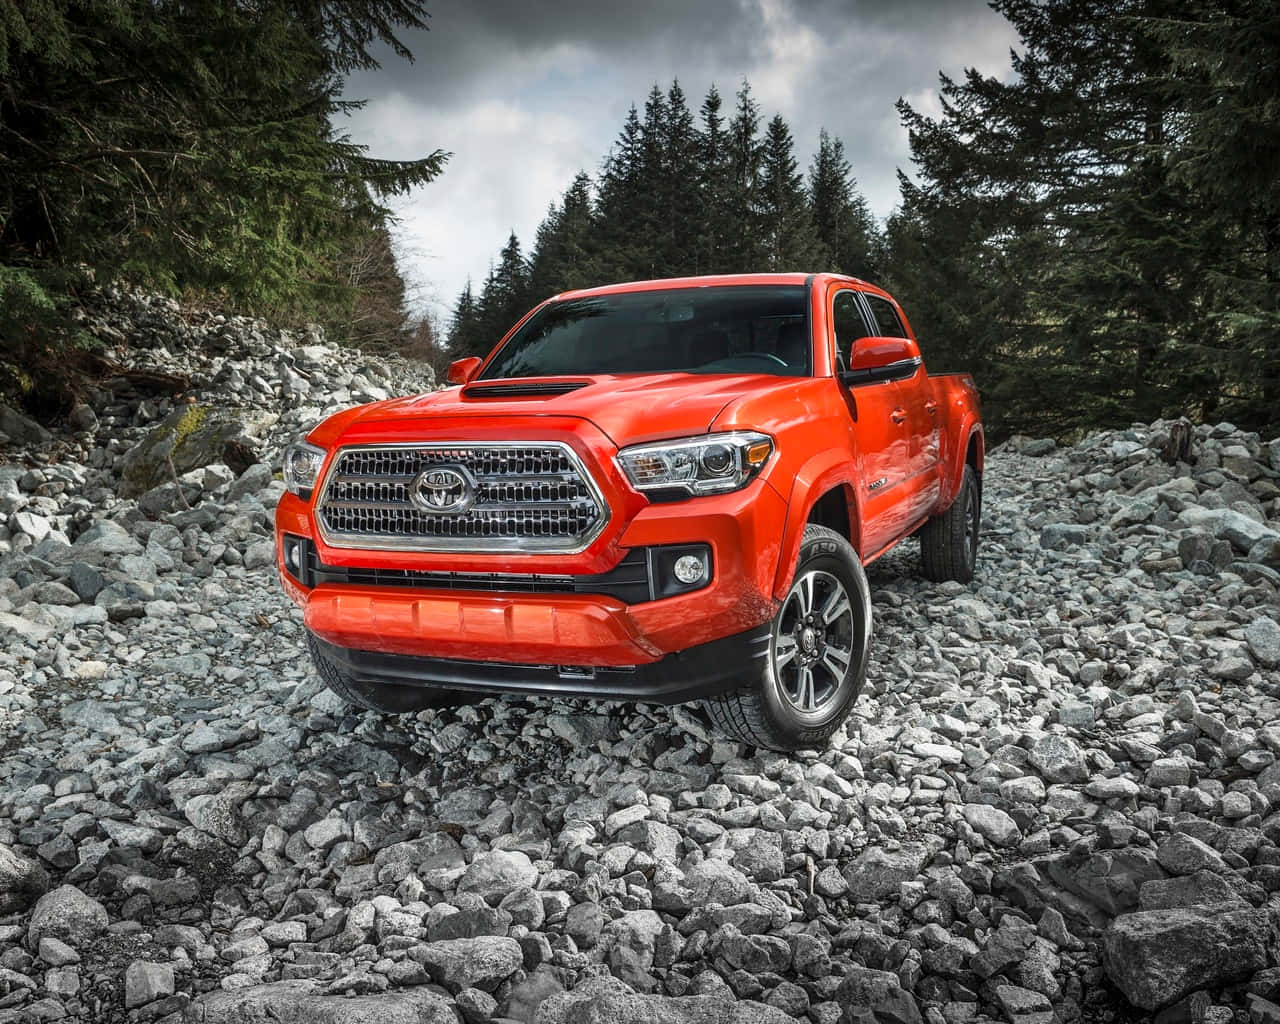 Caption: Robust And Stylish Toyota Tacoma Off-road Wallpaper